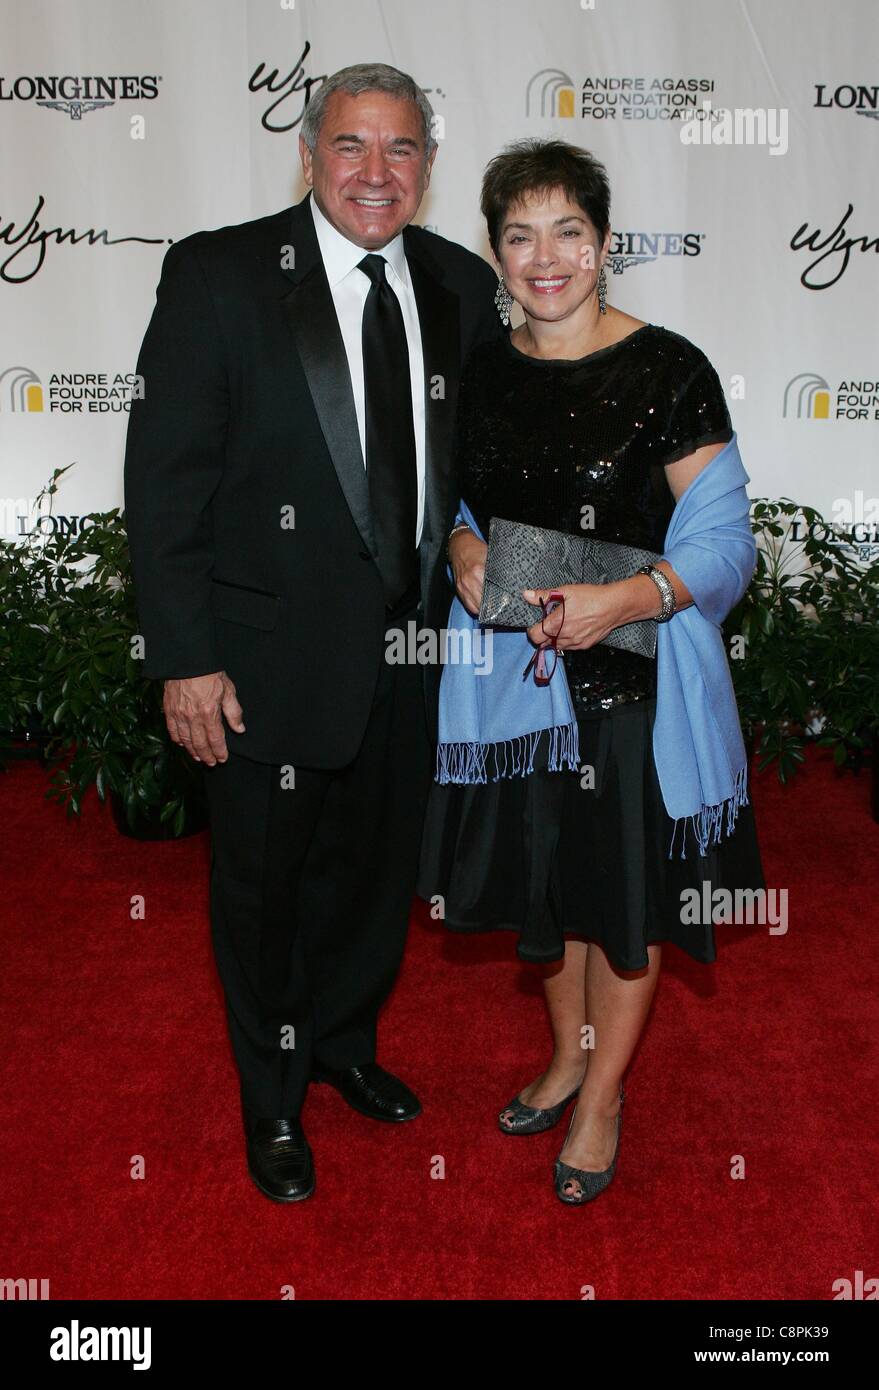 Steve Miller, Suzanne Miller at arrivals for 16th Andre Agassi Grand Slam for Children Benefit Concert, Wynn Las Vegas, Las Vegas, NV October 29, 2011. Photo By: James Atoa/Everett Collection Stock Photo